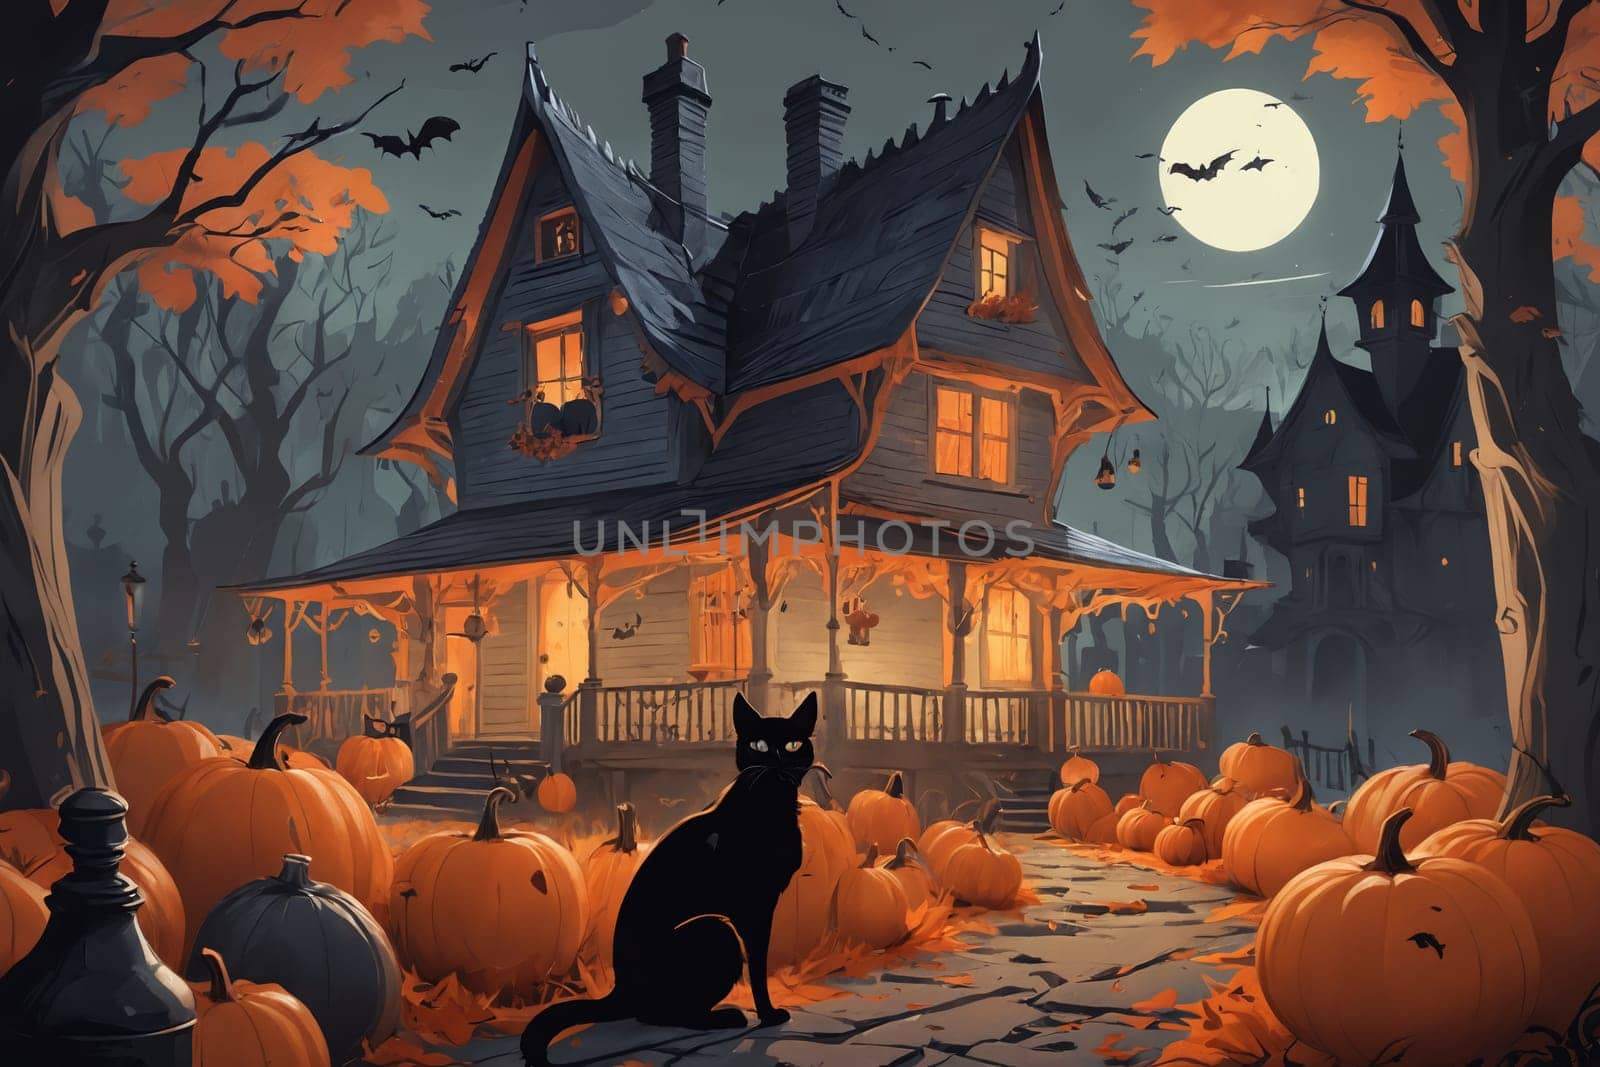 'The Bewitching Night: A Black Cat on a Halloween Decorated Porch'. by Andre1ns